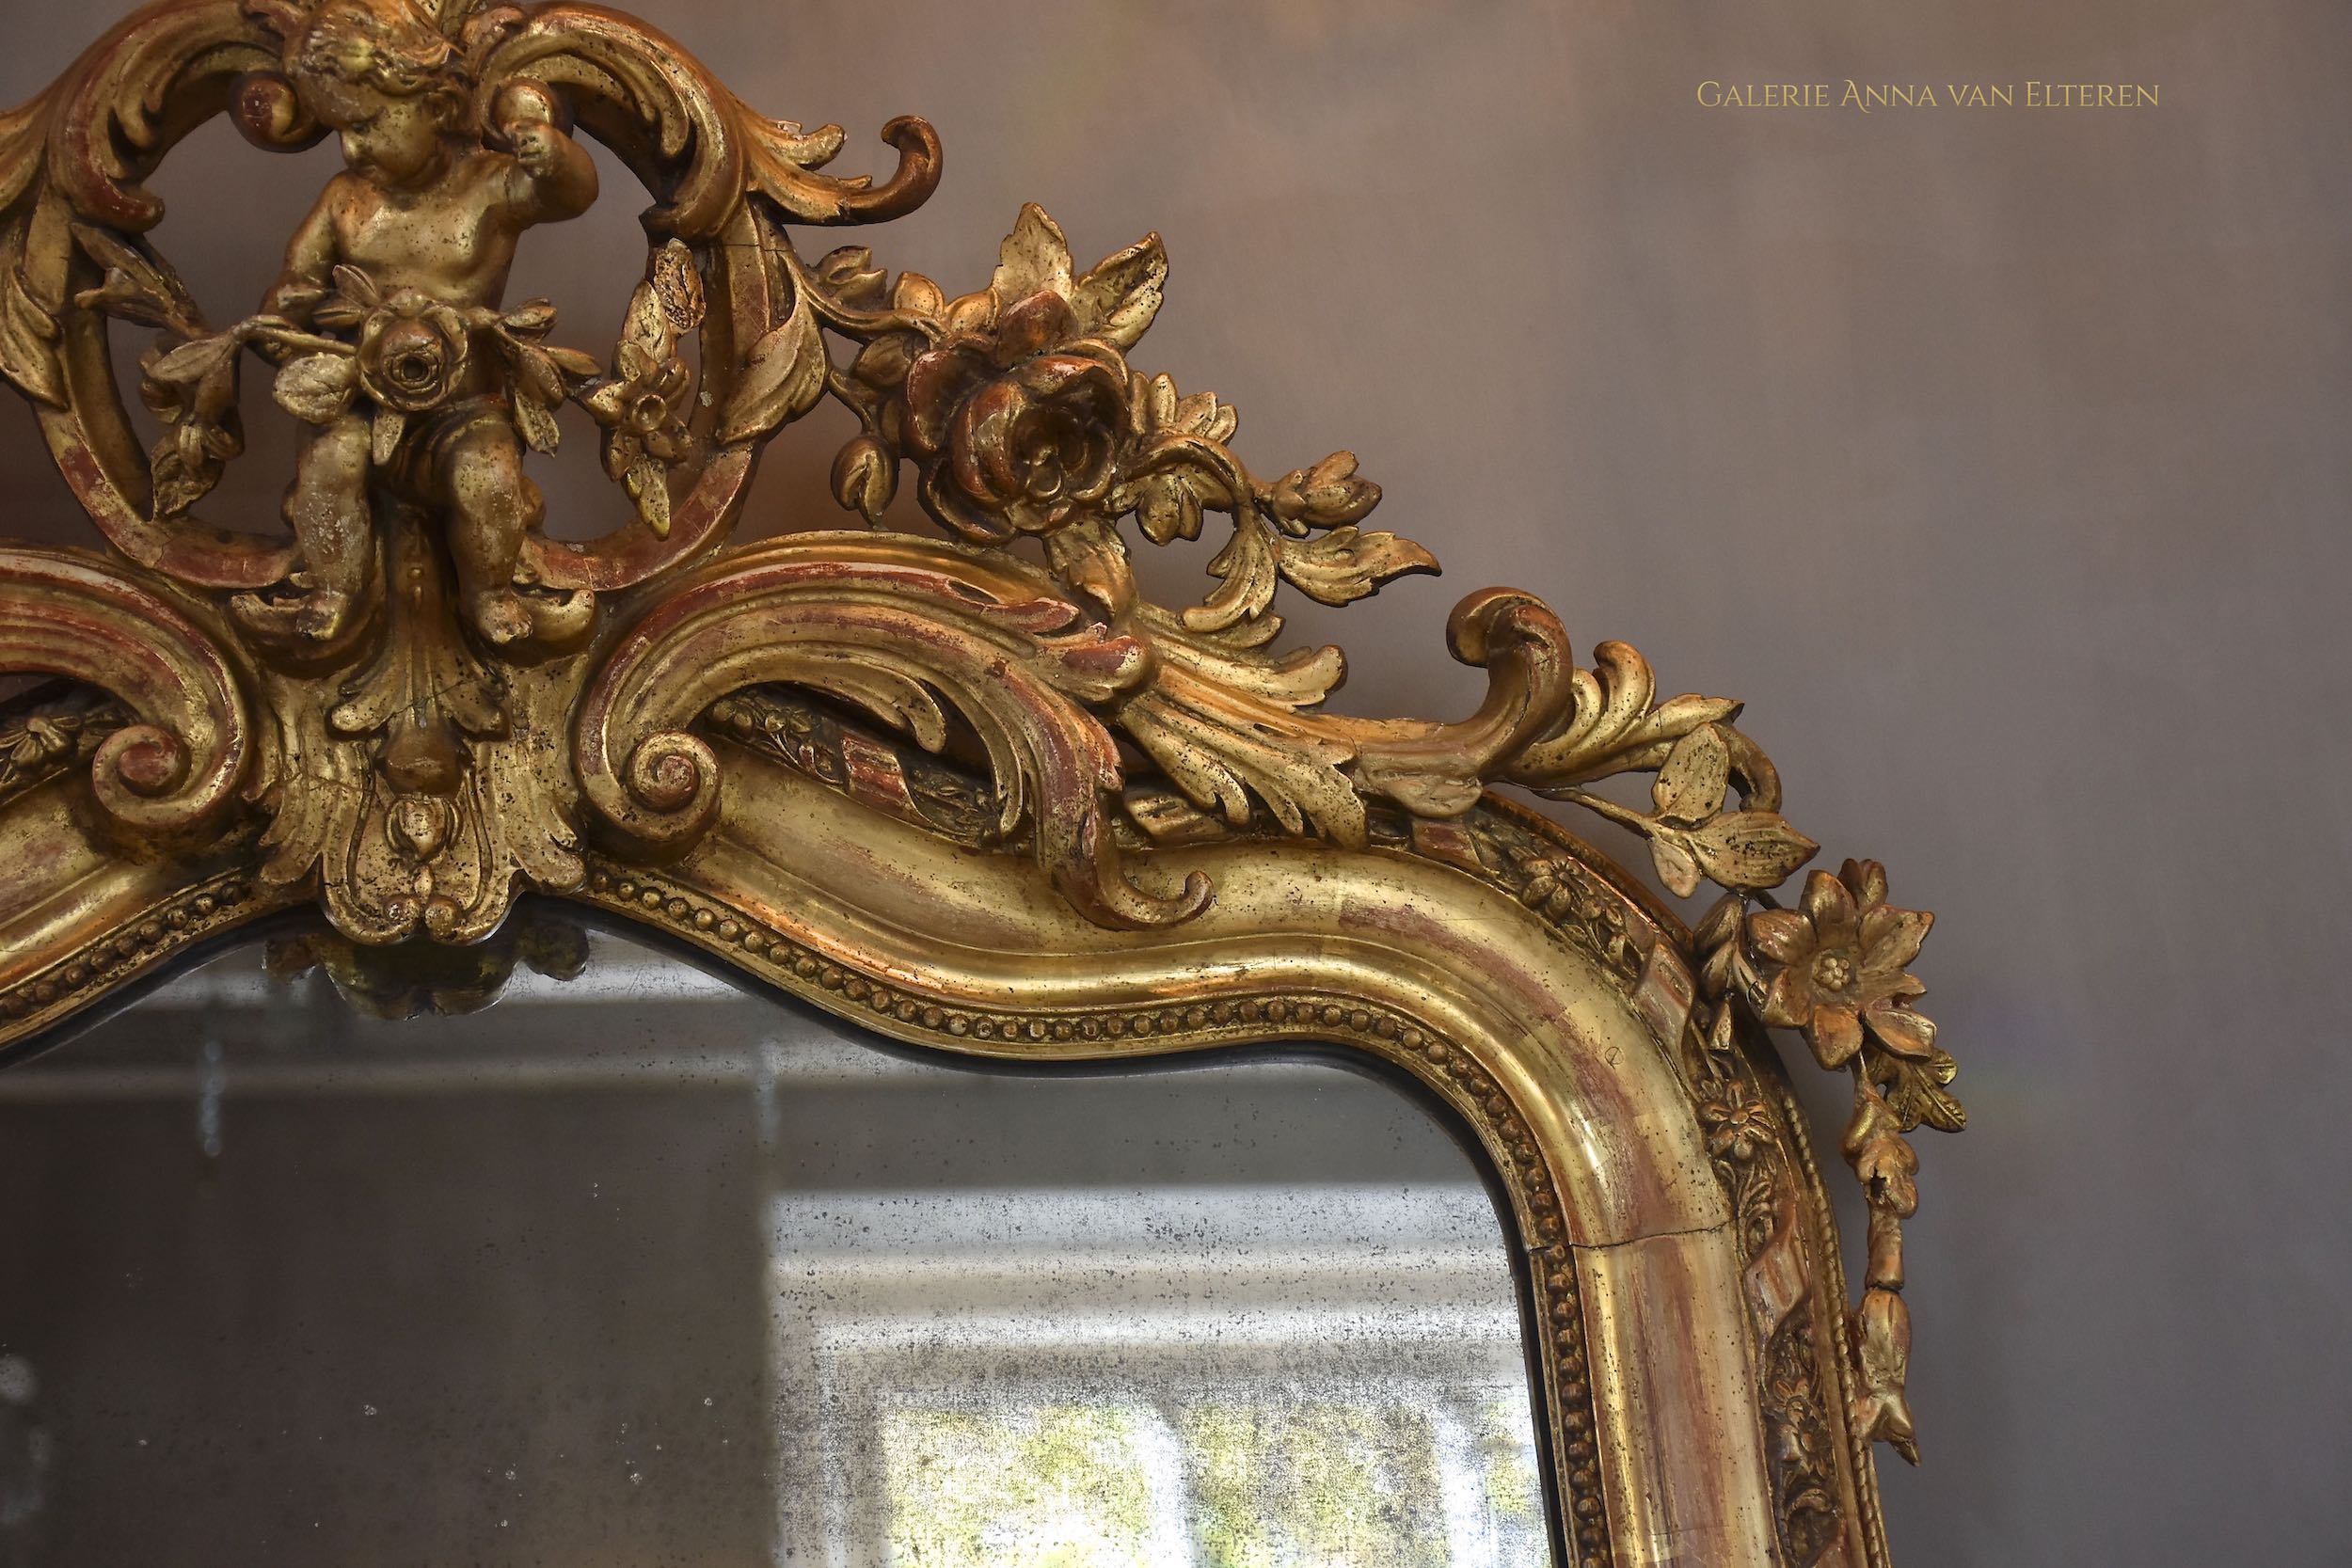 19th c. large impressive French mirror with a fabulous crown and putti